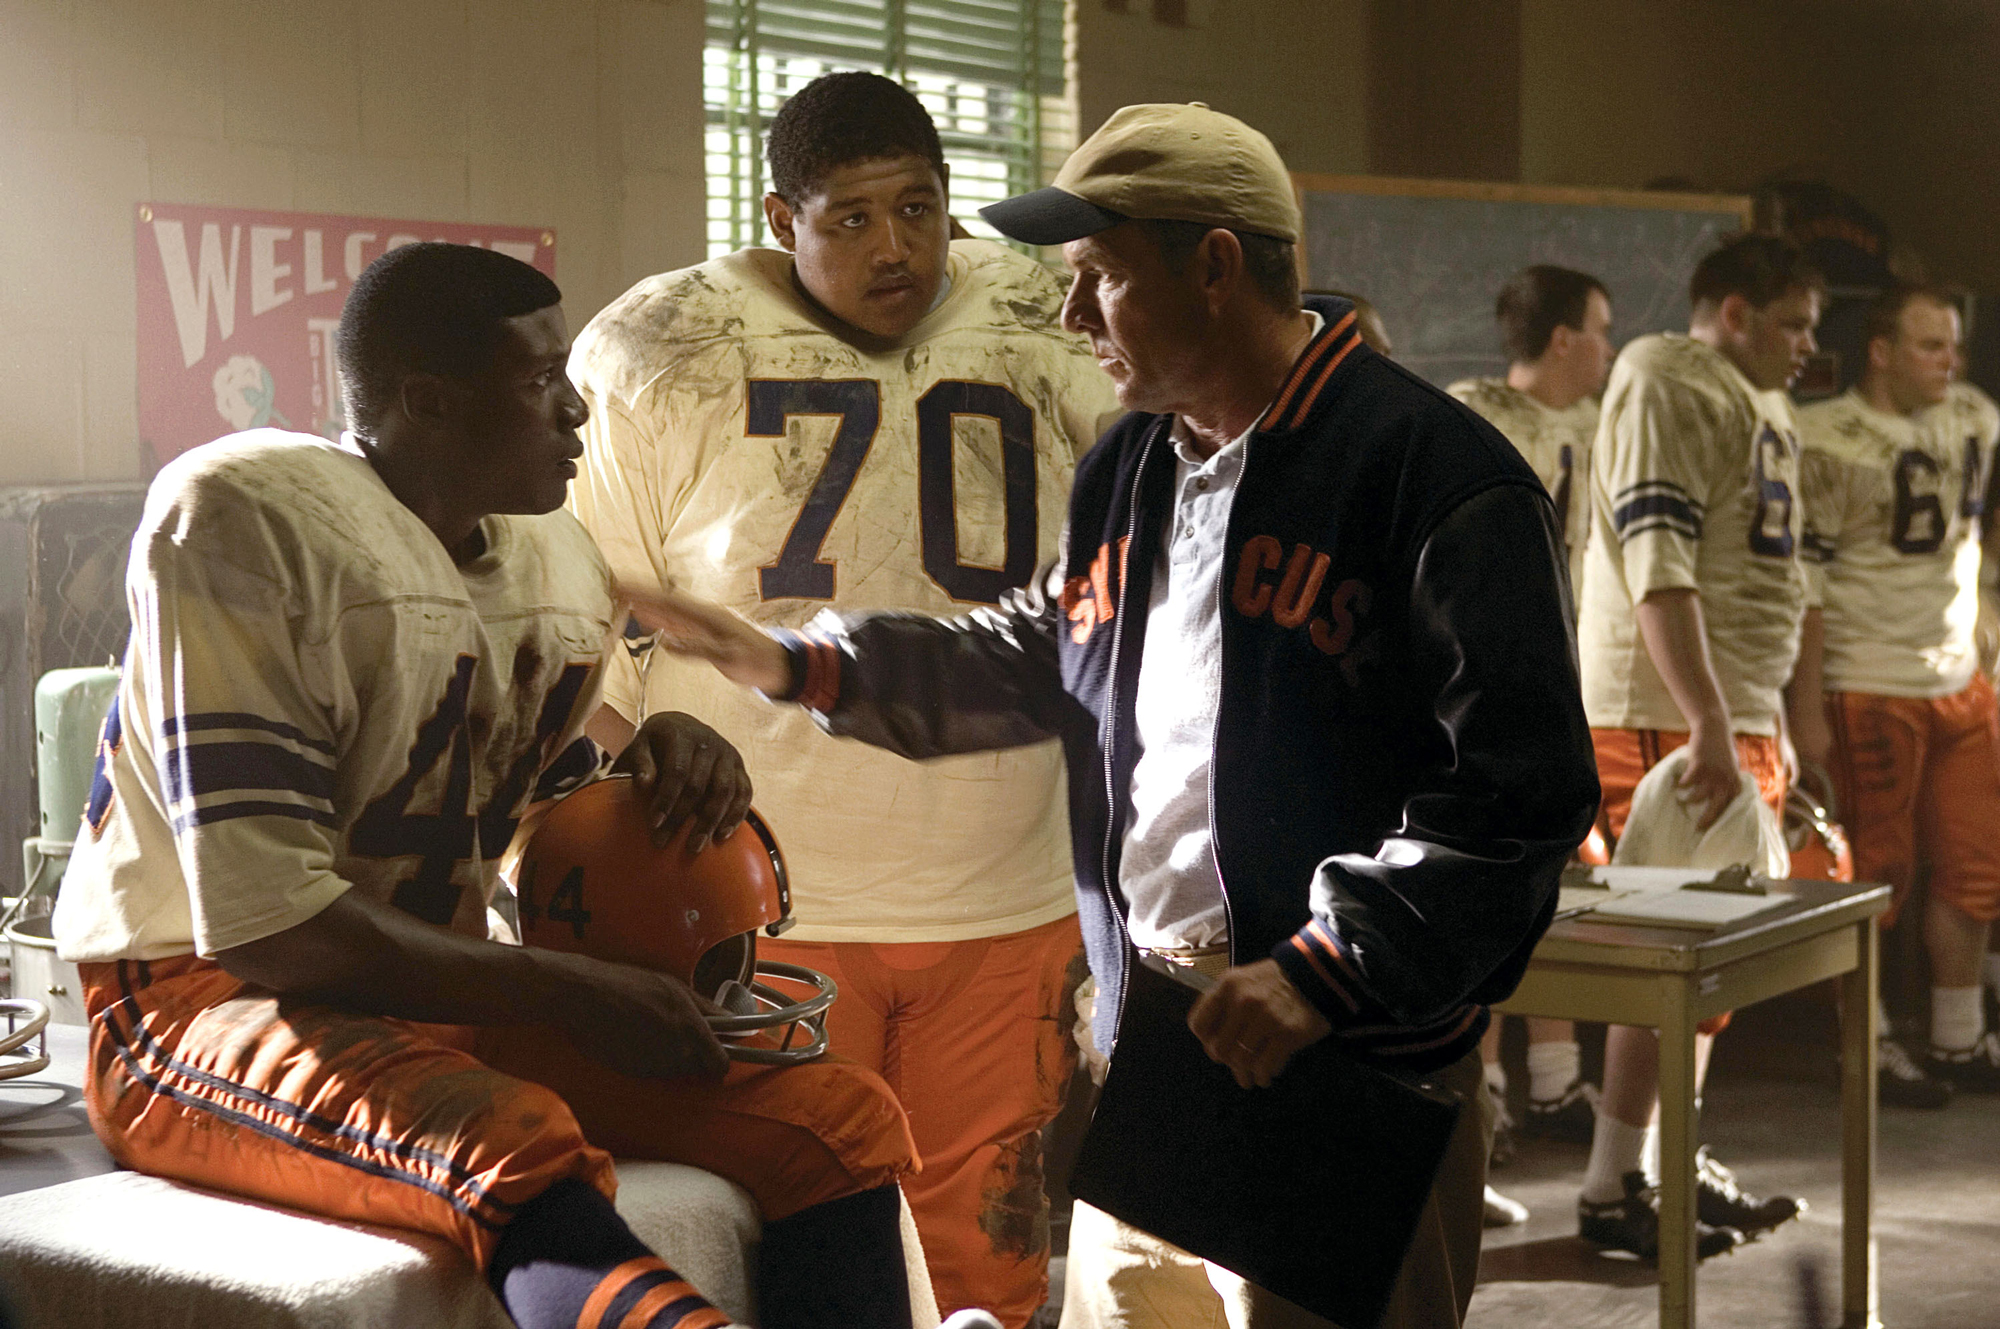 THE EXPRESS, from left: Rob Brown, Omar Benson Miller, Dennis Quaid, 2008